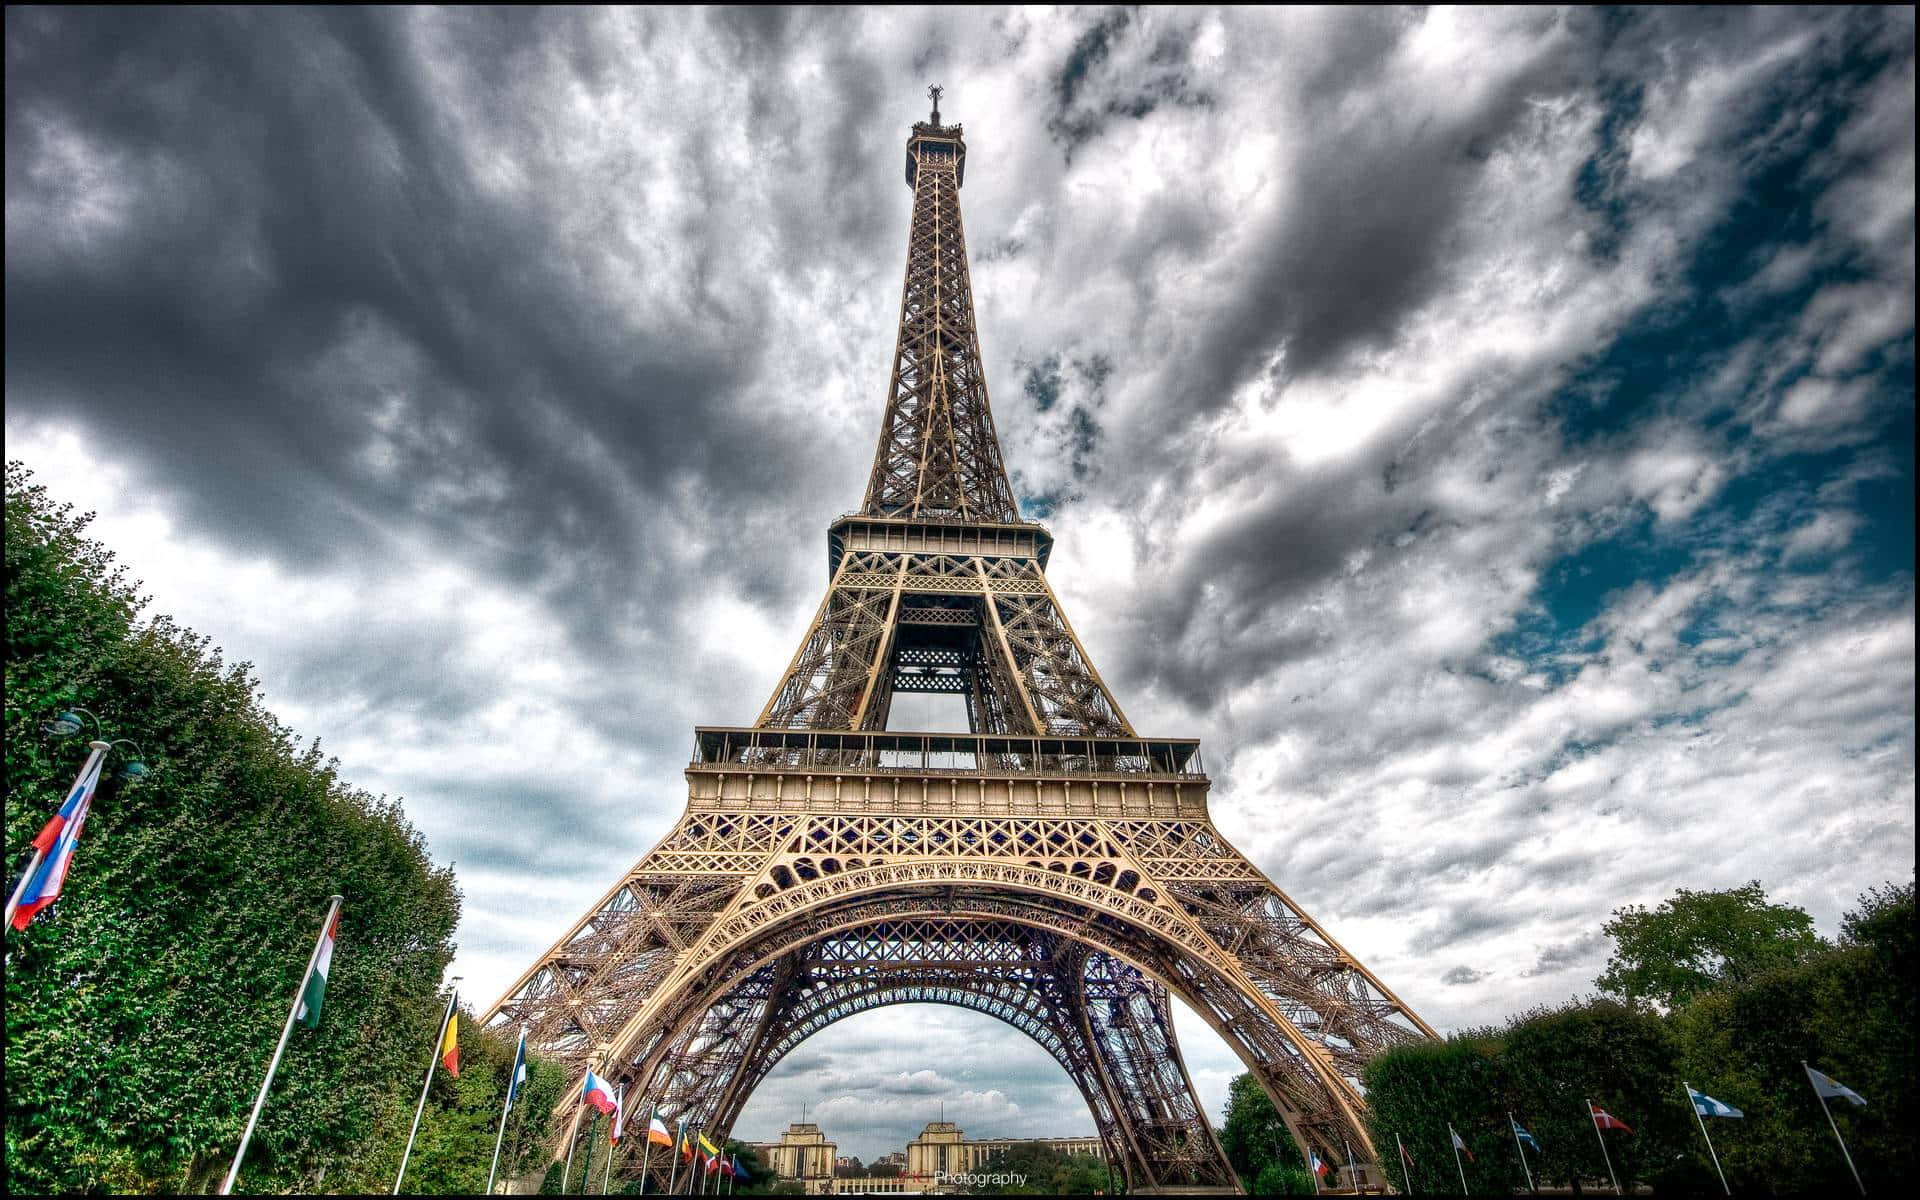 Explore the beauty of the Eiffel Tower on a sunny day